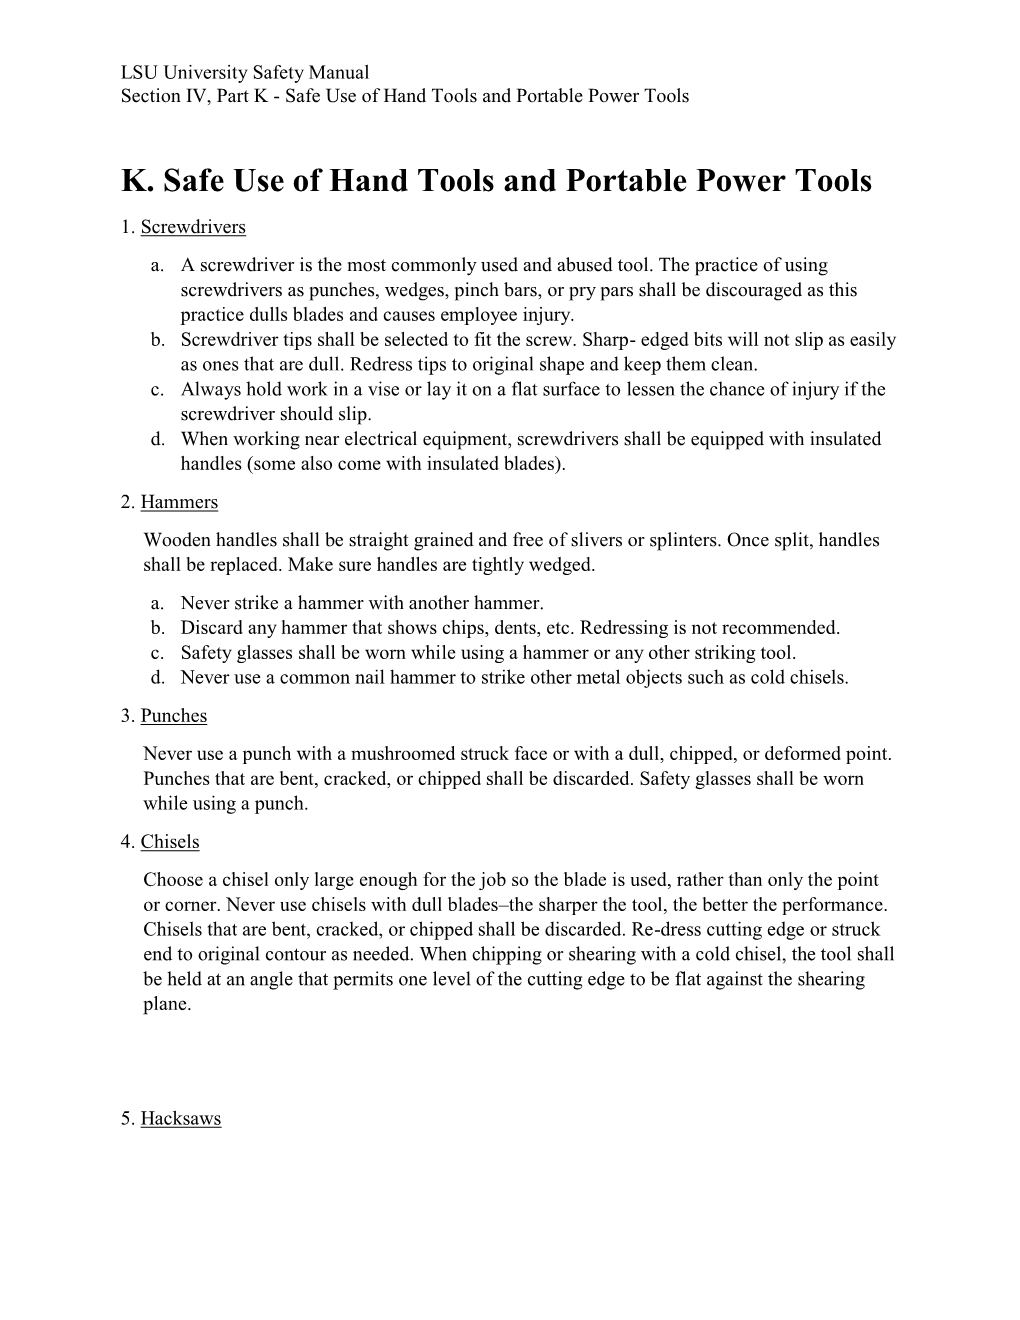 K. Safe Use of Hand Tools and Portable Power Tools 1